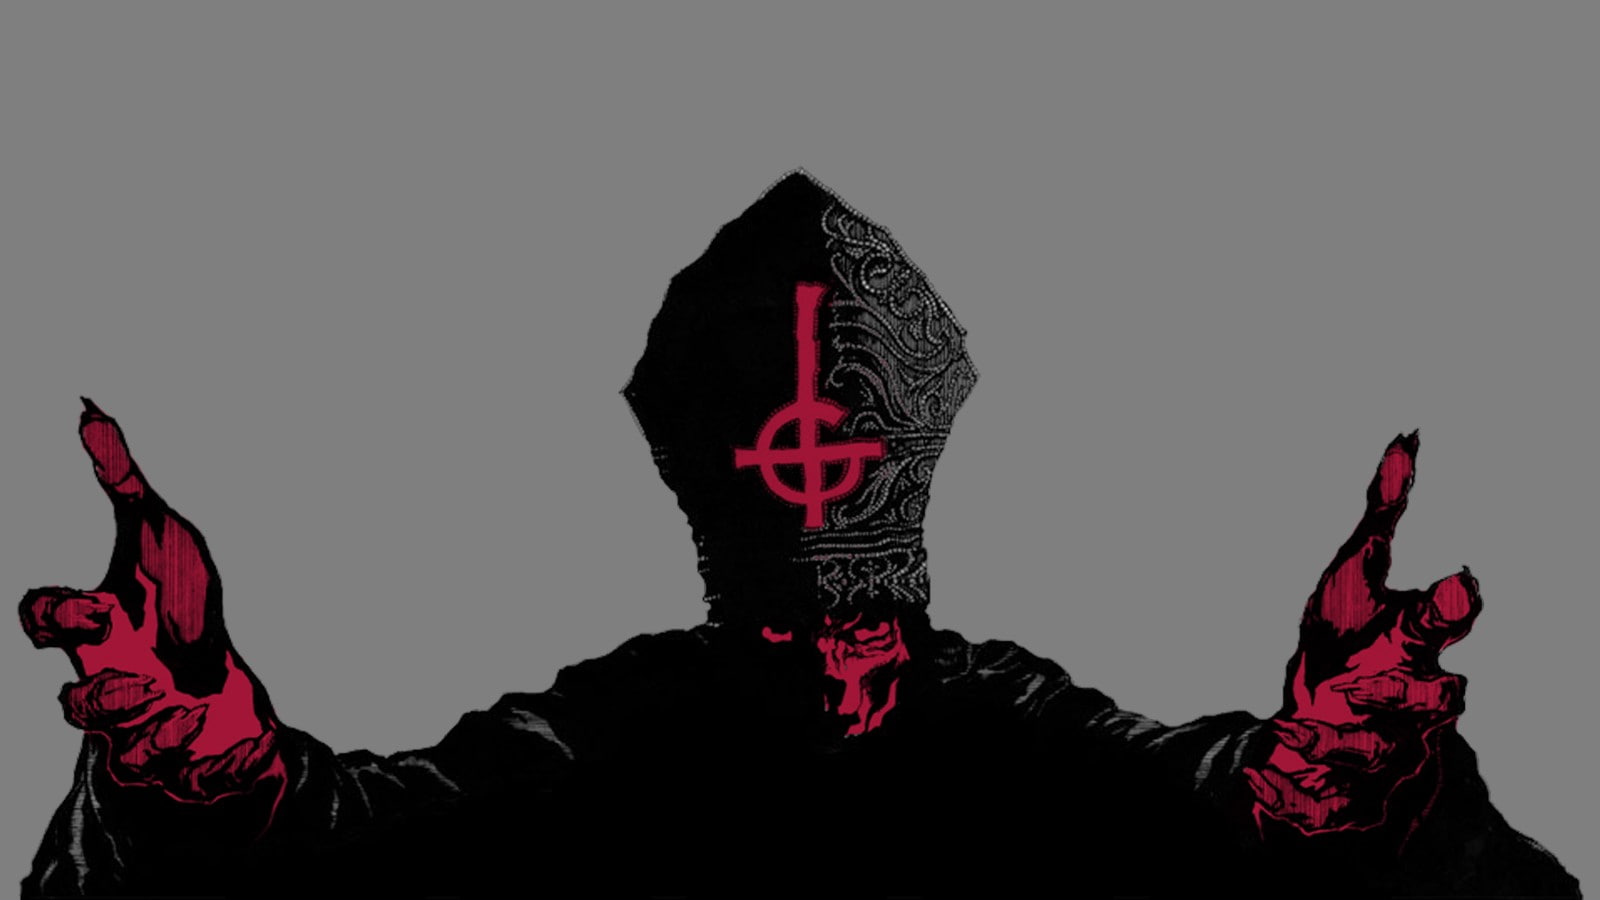 Album, covers, cross, Down, Ghost, religion, Upside, one person